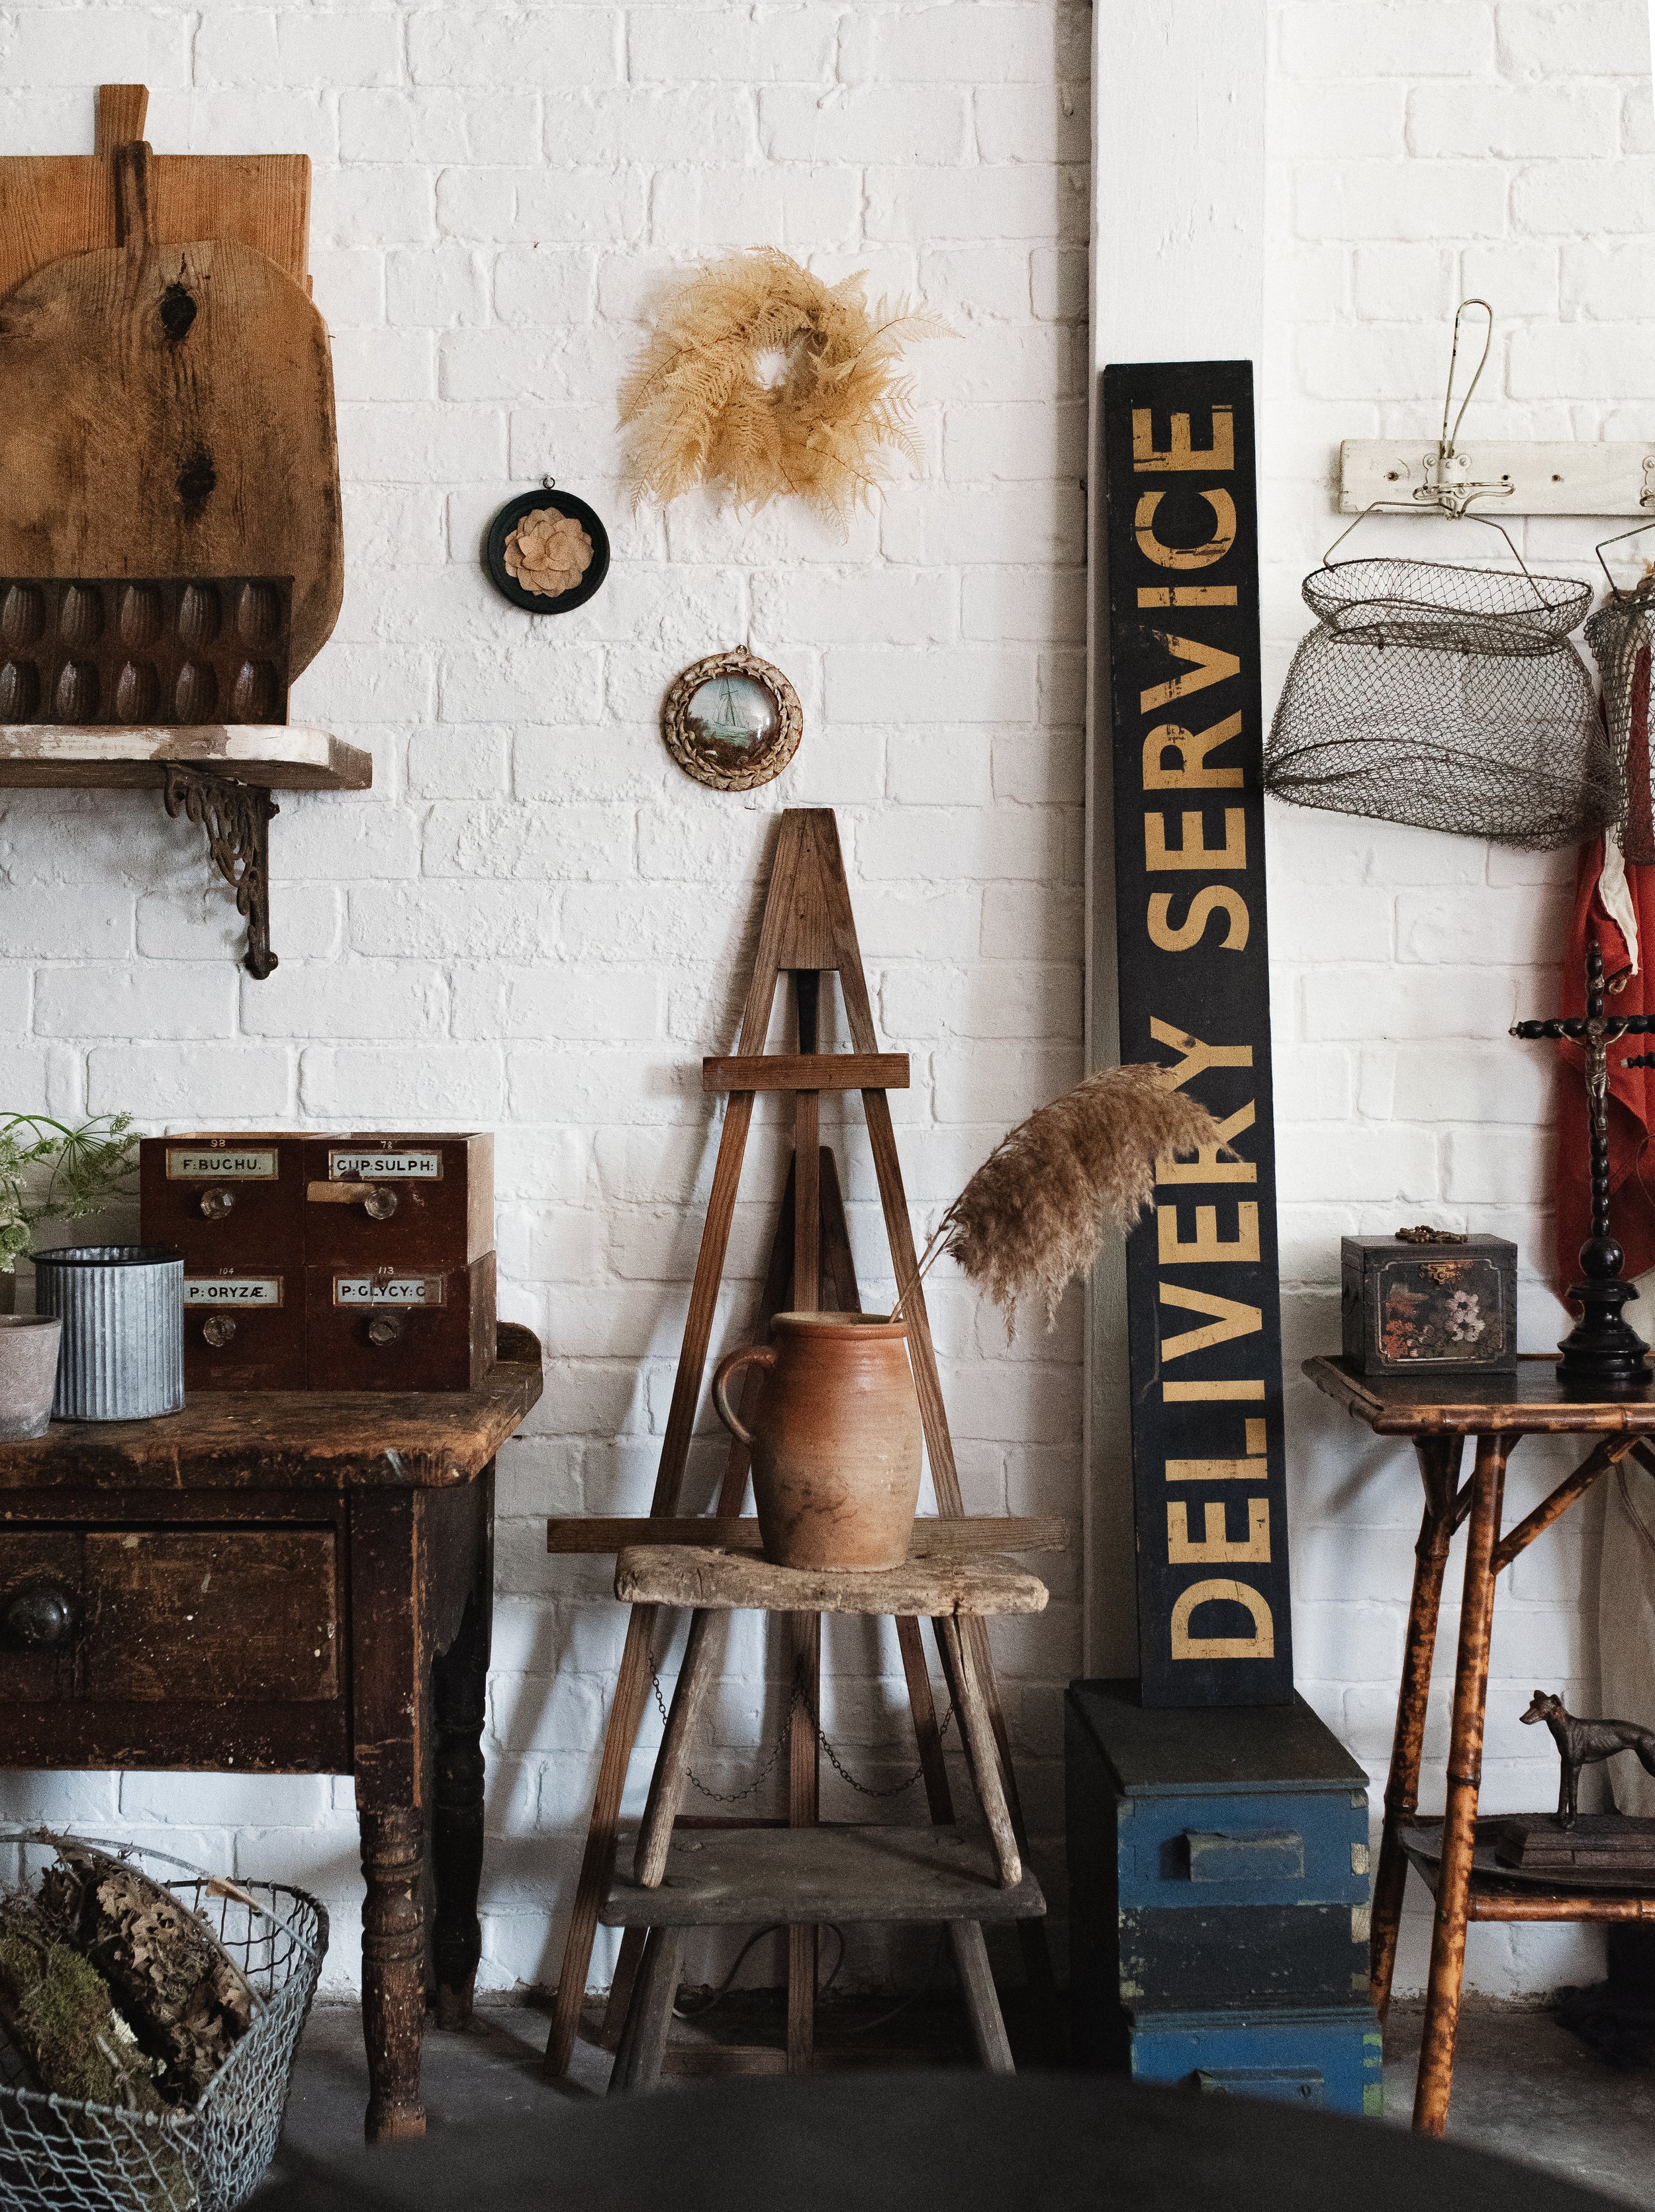 Studio of stylist and vintage seller filled with beautiful old objects